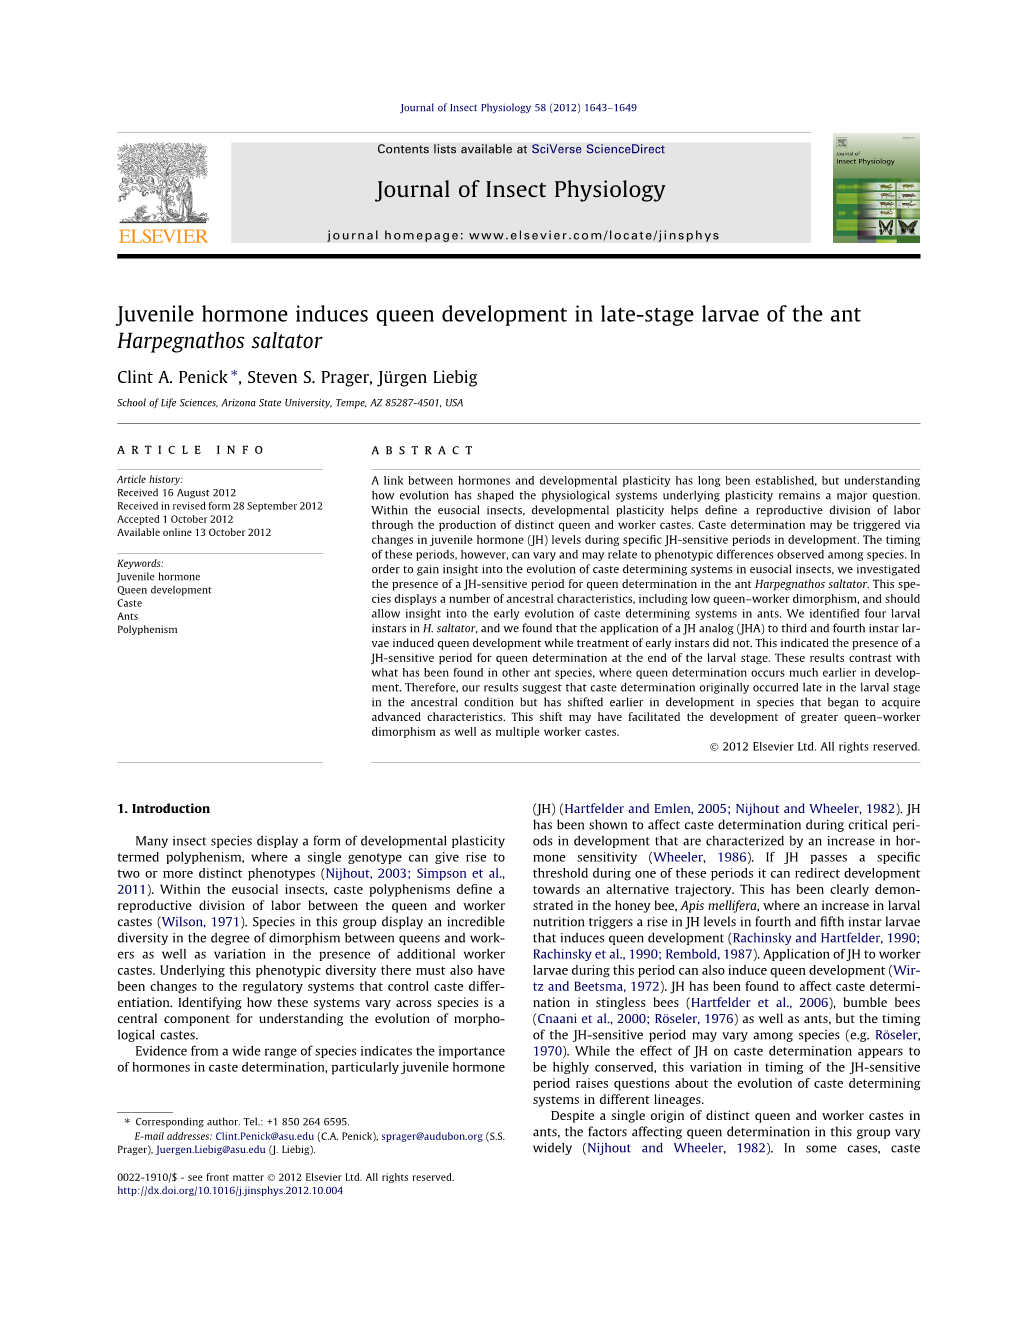 Journal of Insect Physiology 58 (2012) 1643–1649